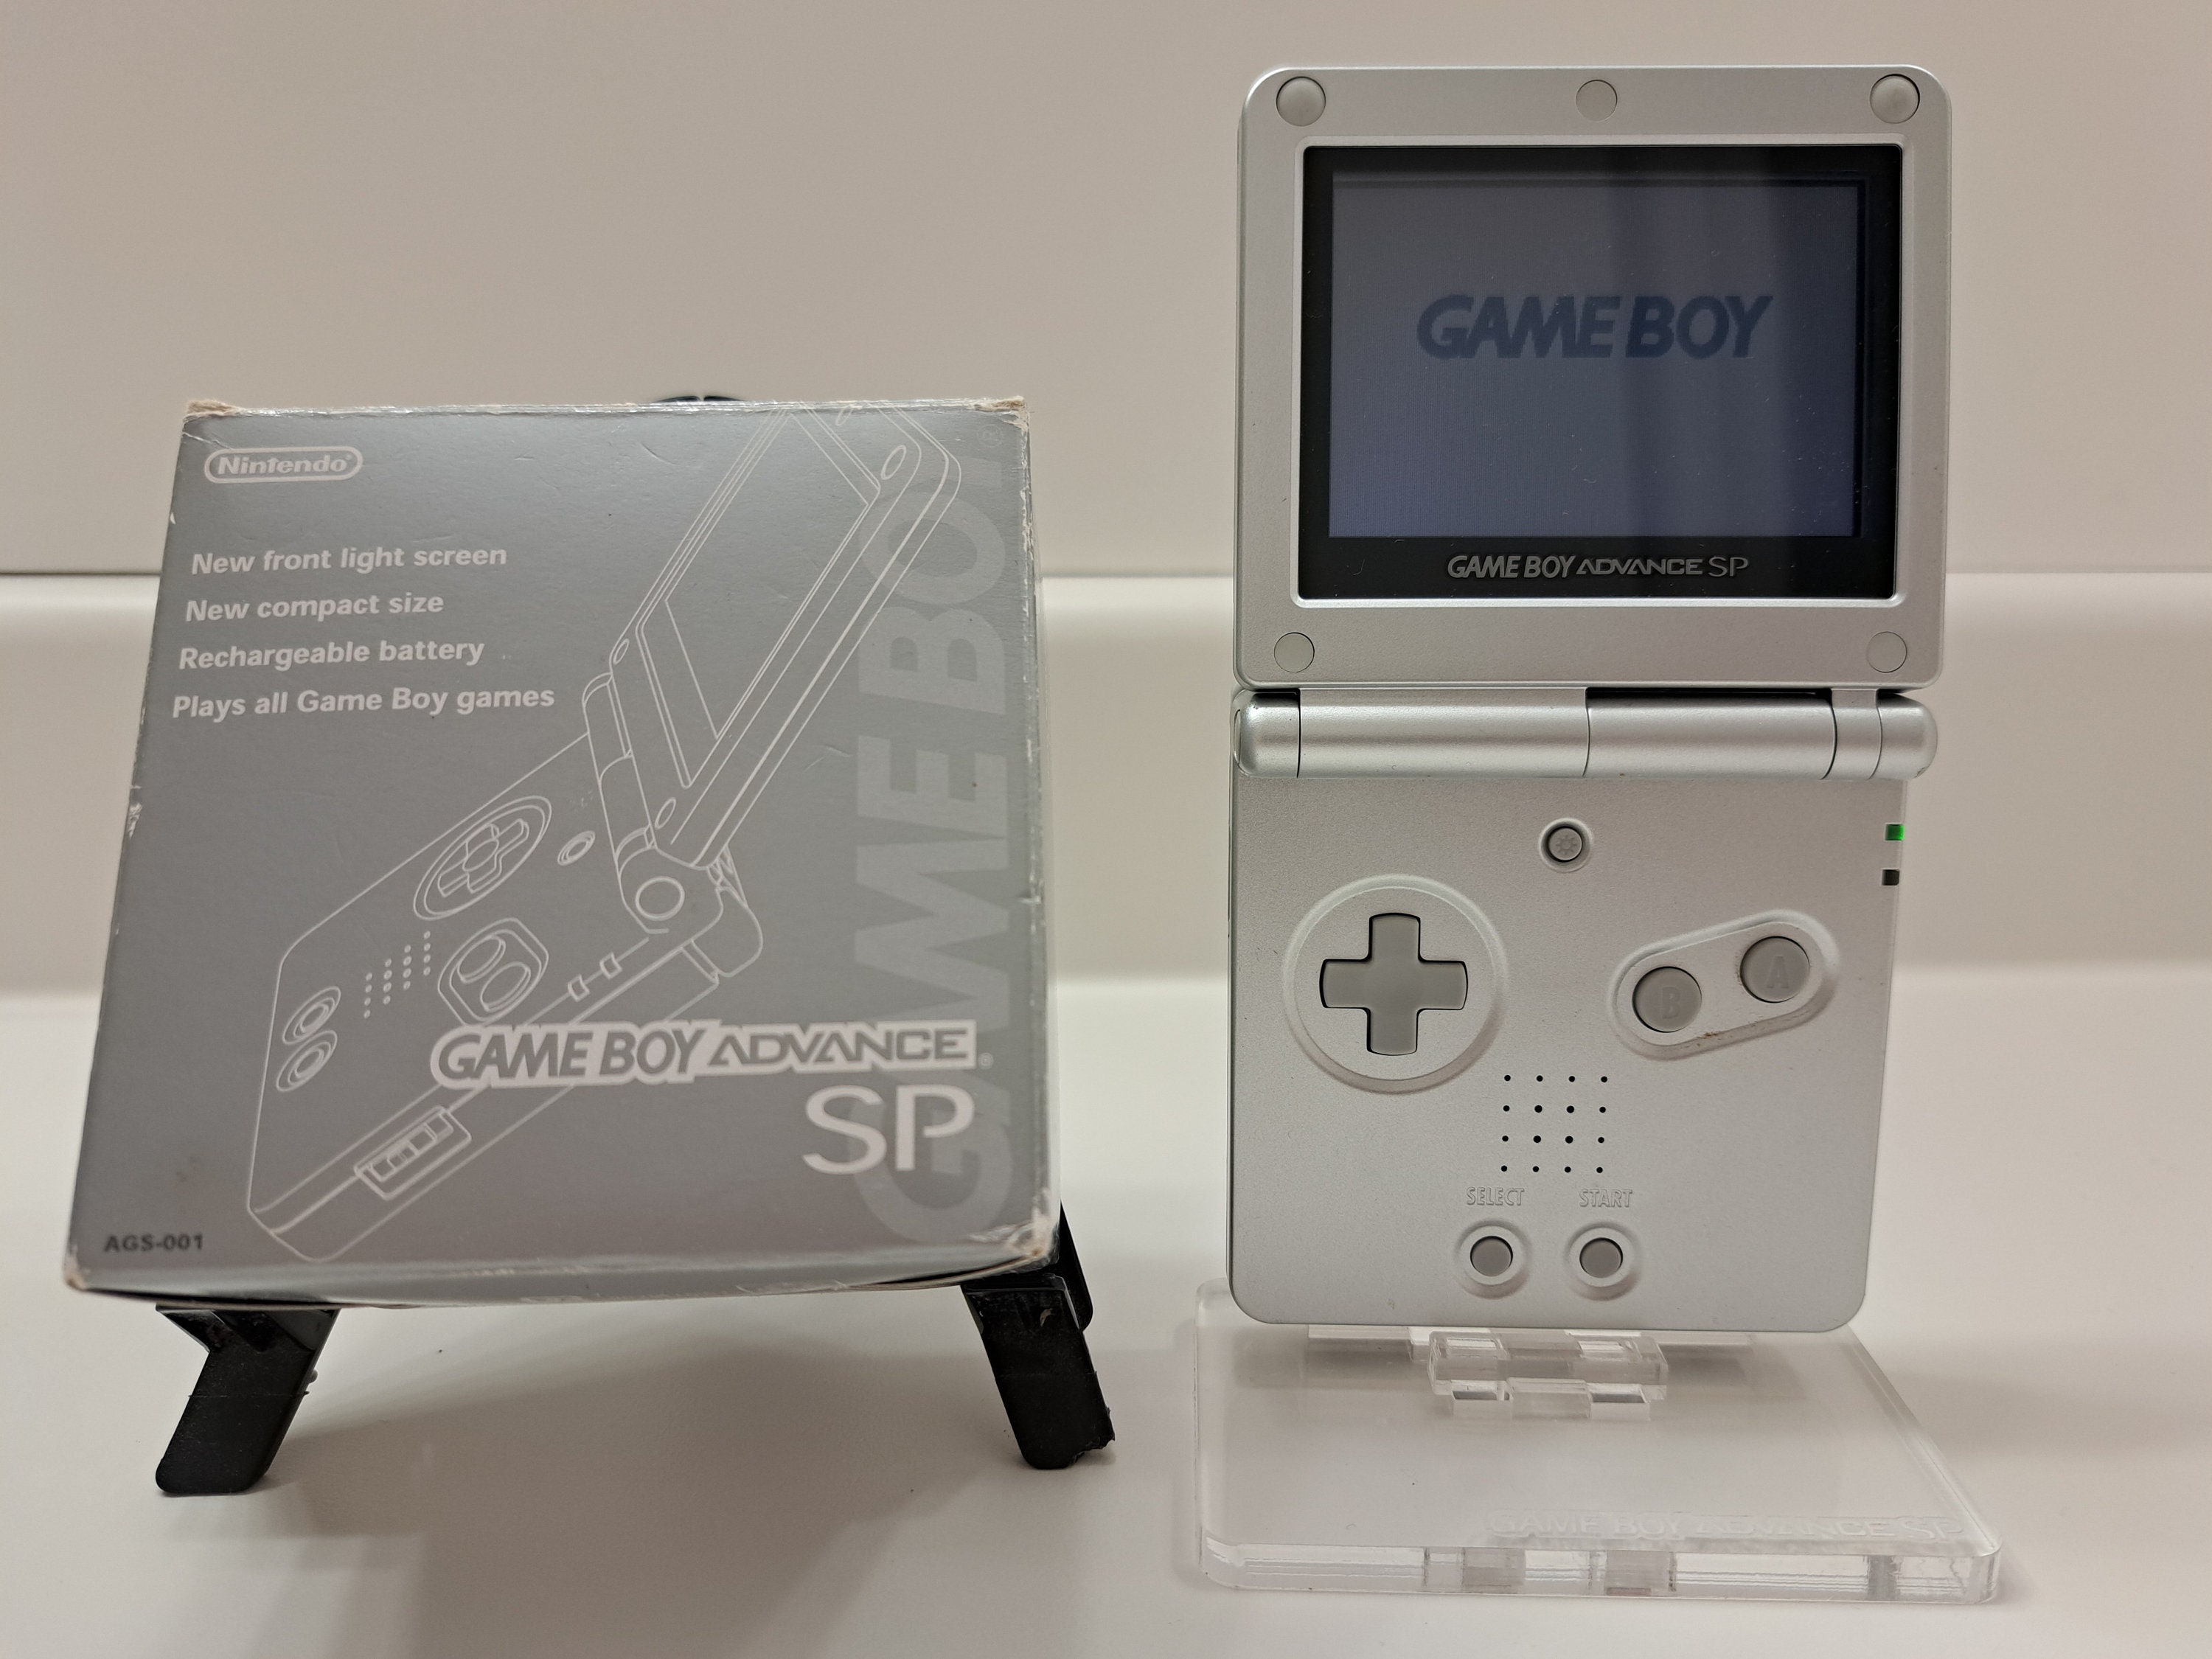 Nintendo GameBoy Advance SP GBA Game Boy SP Pearl Blue Handheld Console  With Charger and Box Works Great, Tested RARE 